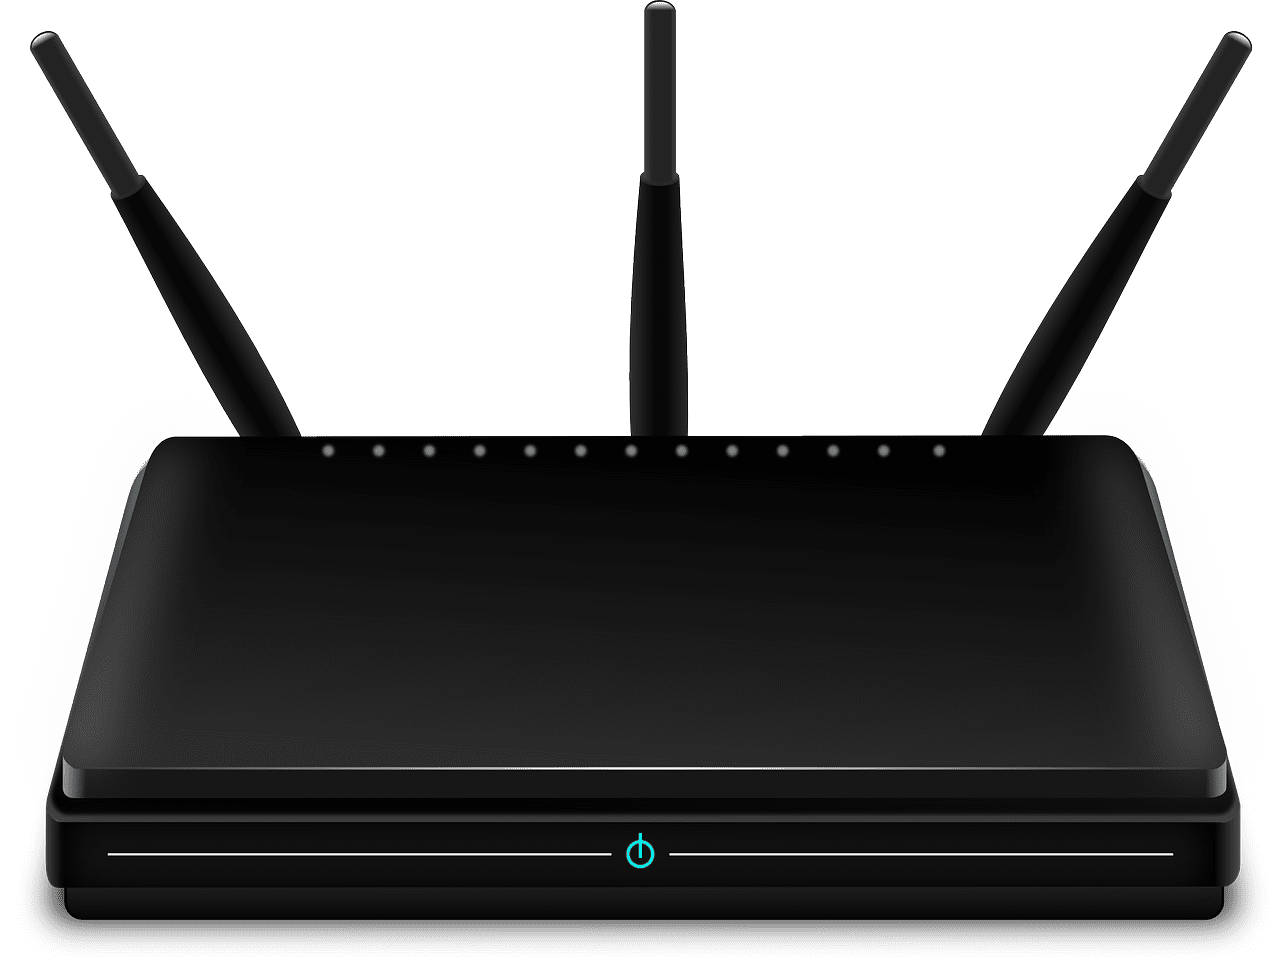 Top 8 best wireless access point to buy in 2020